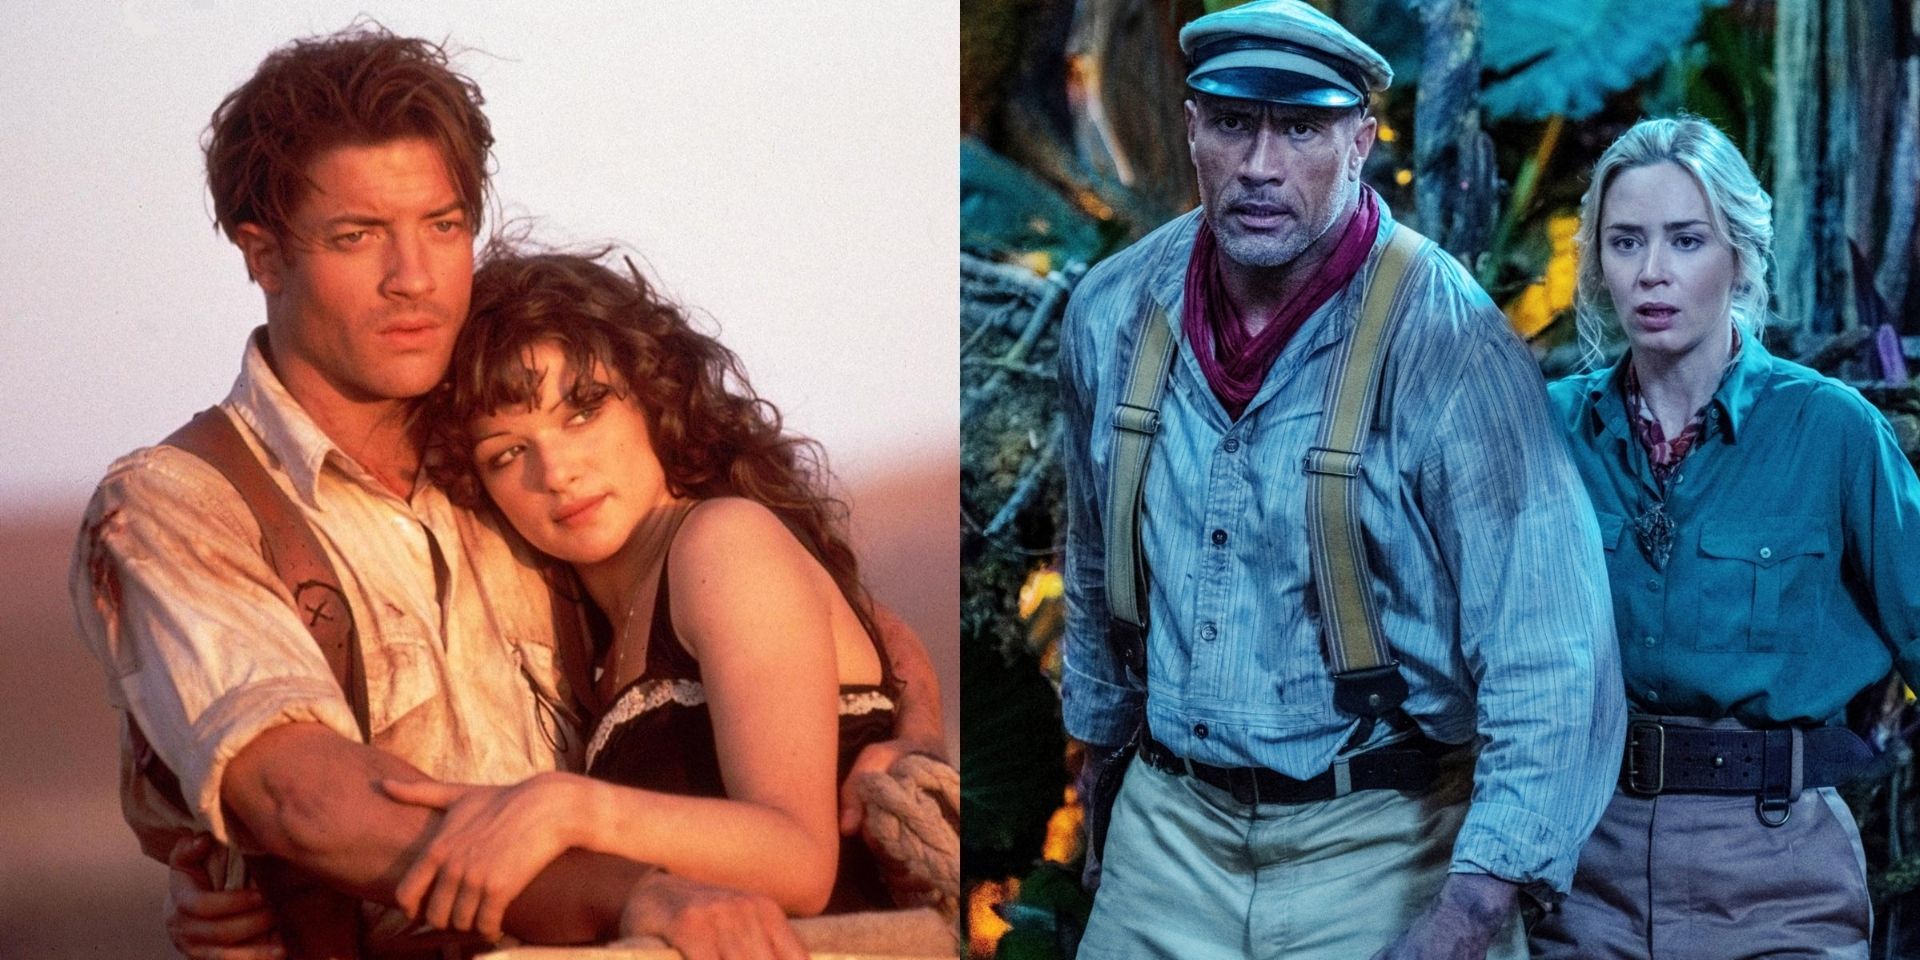 Rick O'Connell and Evelyn from The Mummy alongside Frank and Lilly from Jungle Cruise